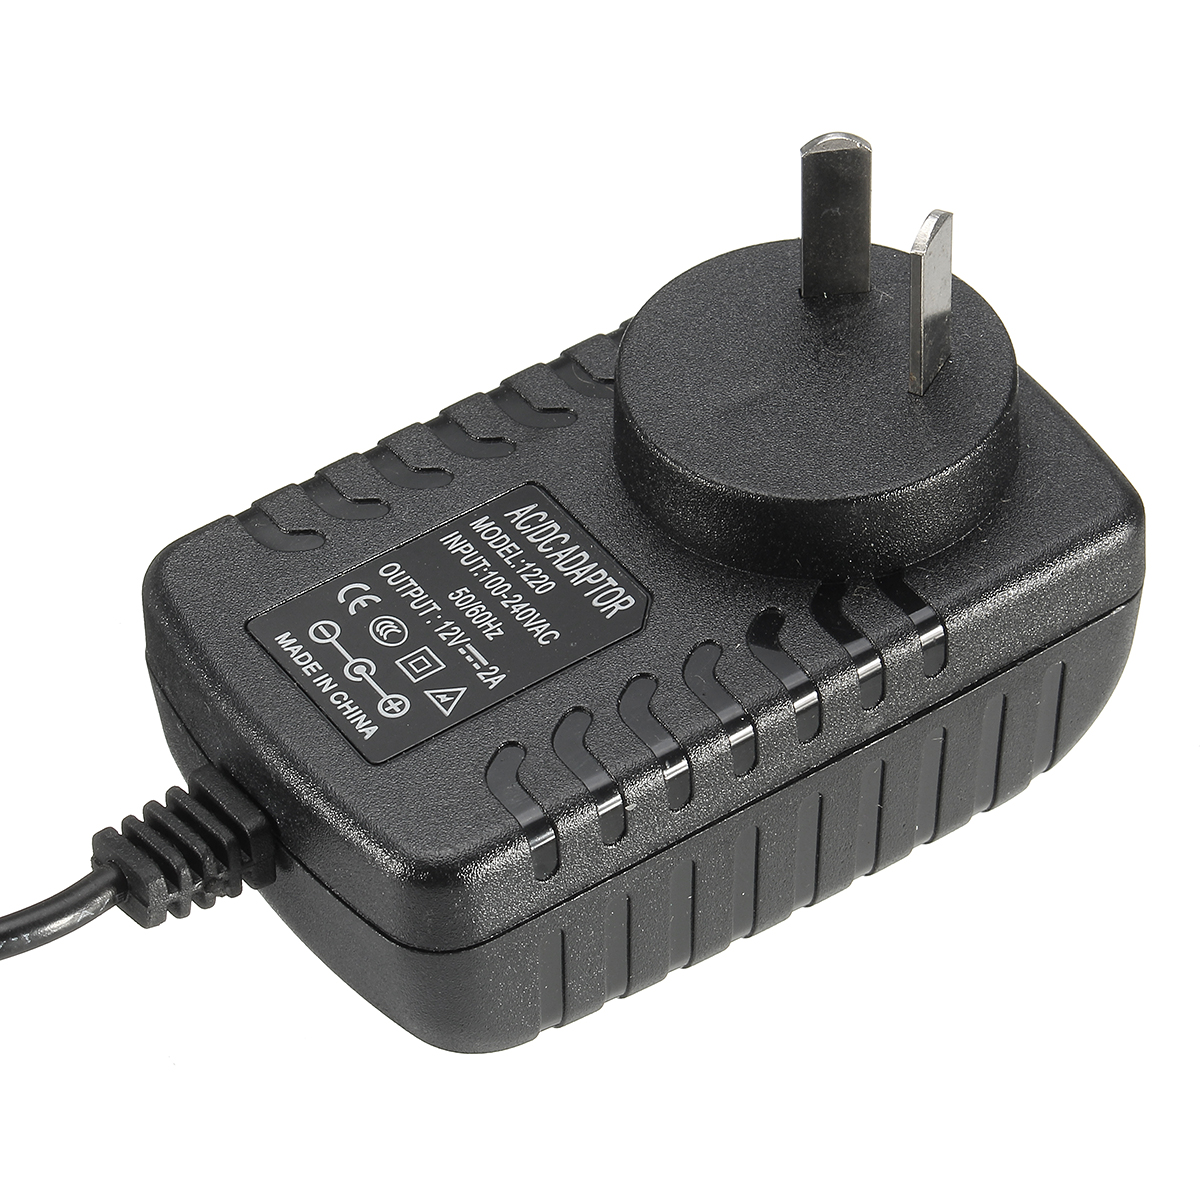 12V-2A-Adapter-for-Makita-BMR100-BMR101-JobSite-Radio-Switching-Power-Supply-Cord-Wall-Plug-Charger-1363818-7